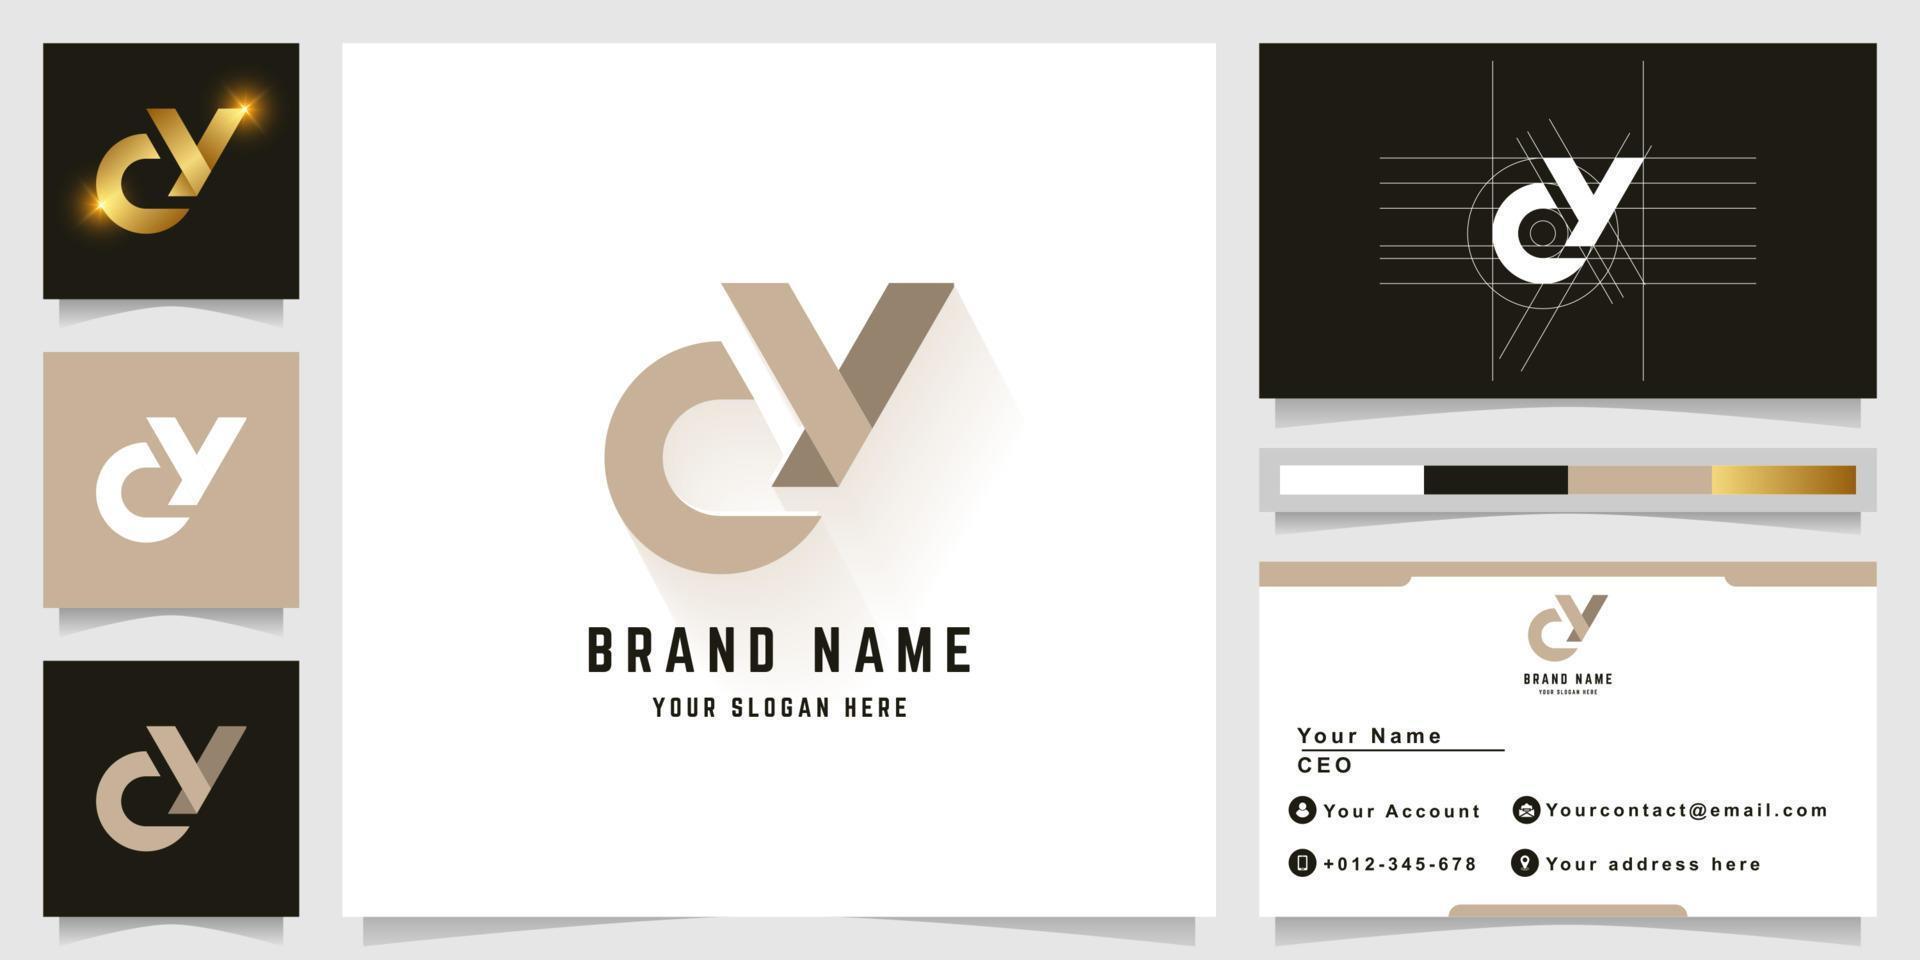 Letter CY or dV monogram logo with business card design vector